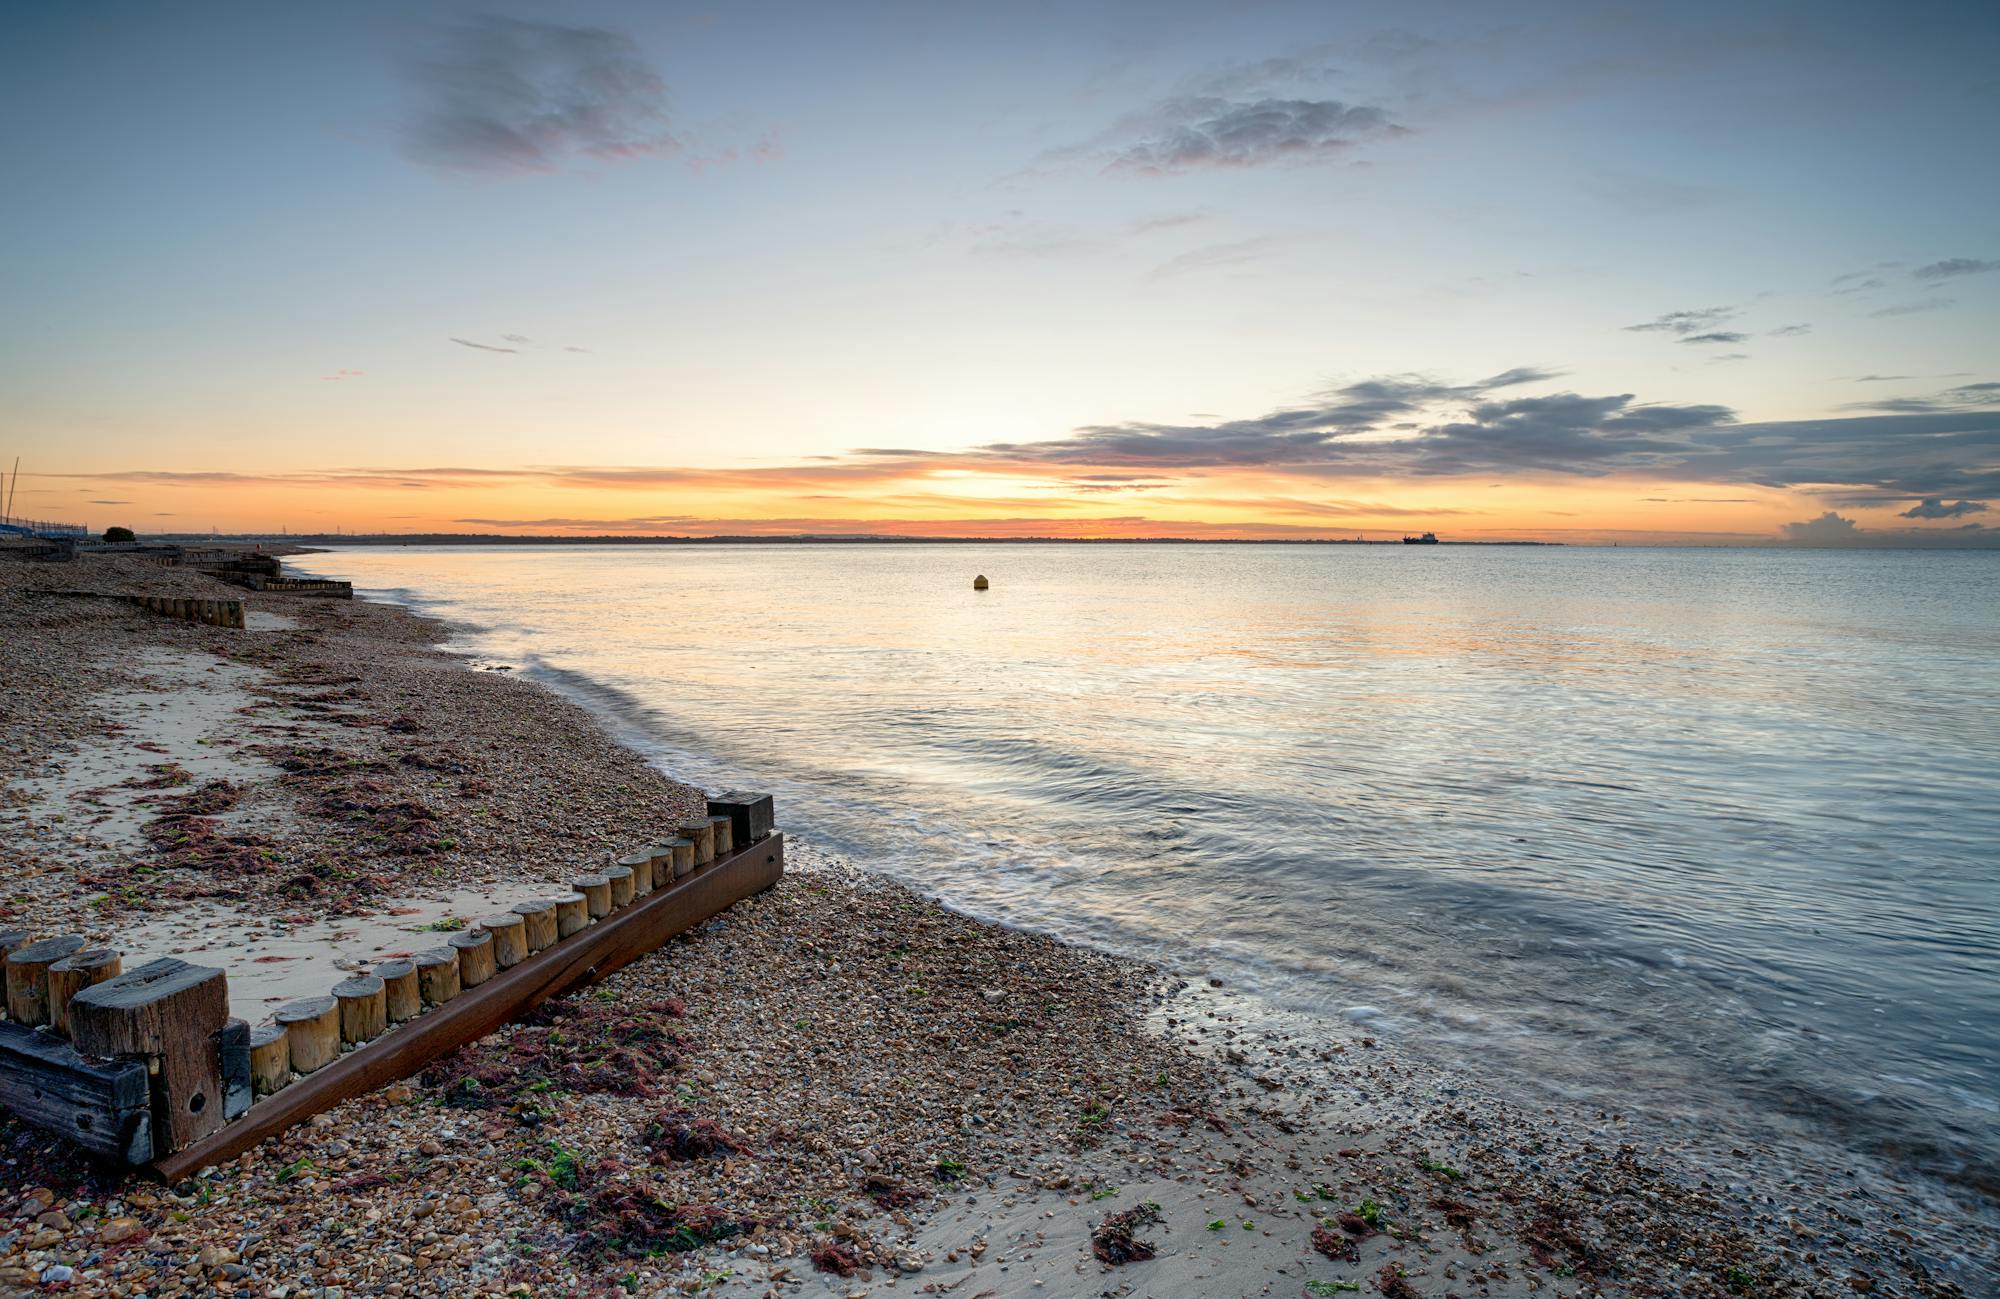 Looking out to the Solent from Calshot beach